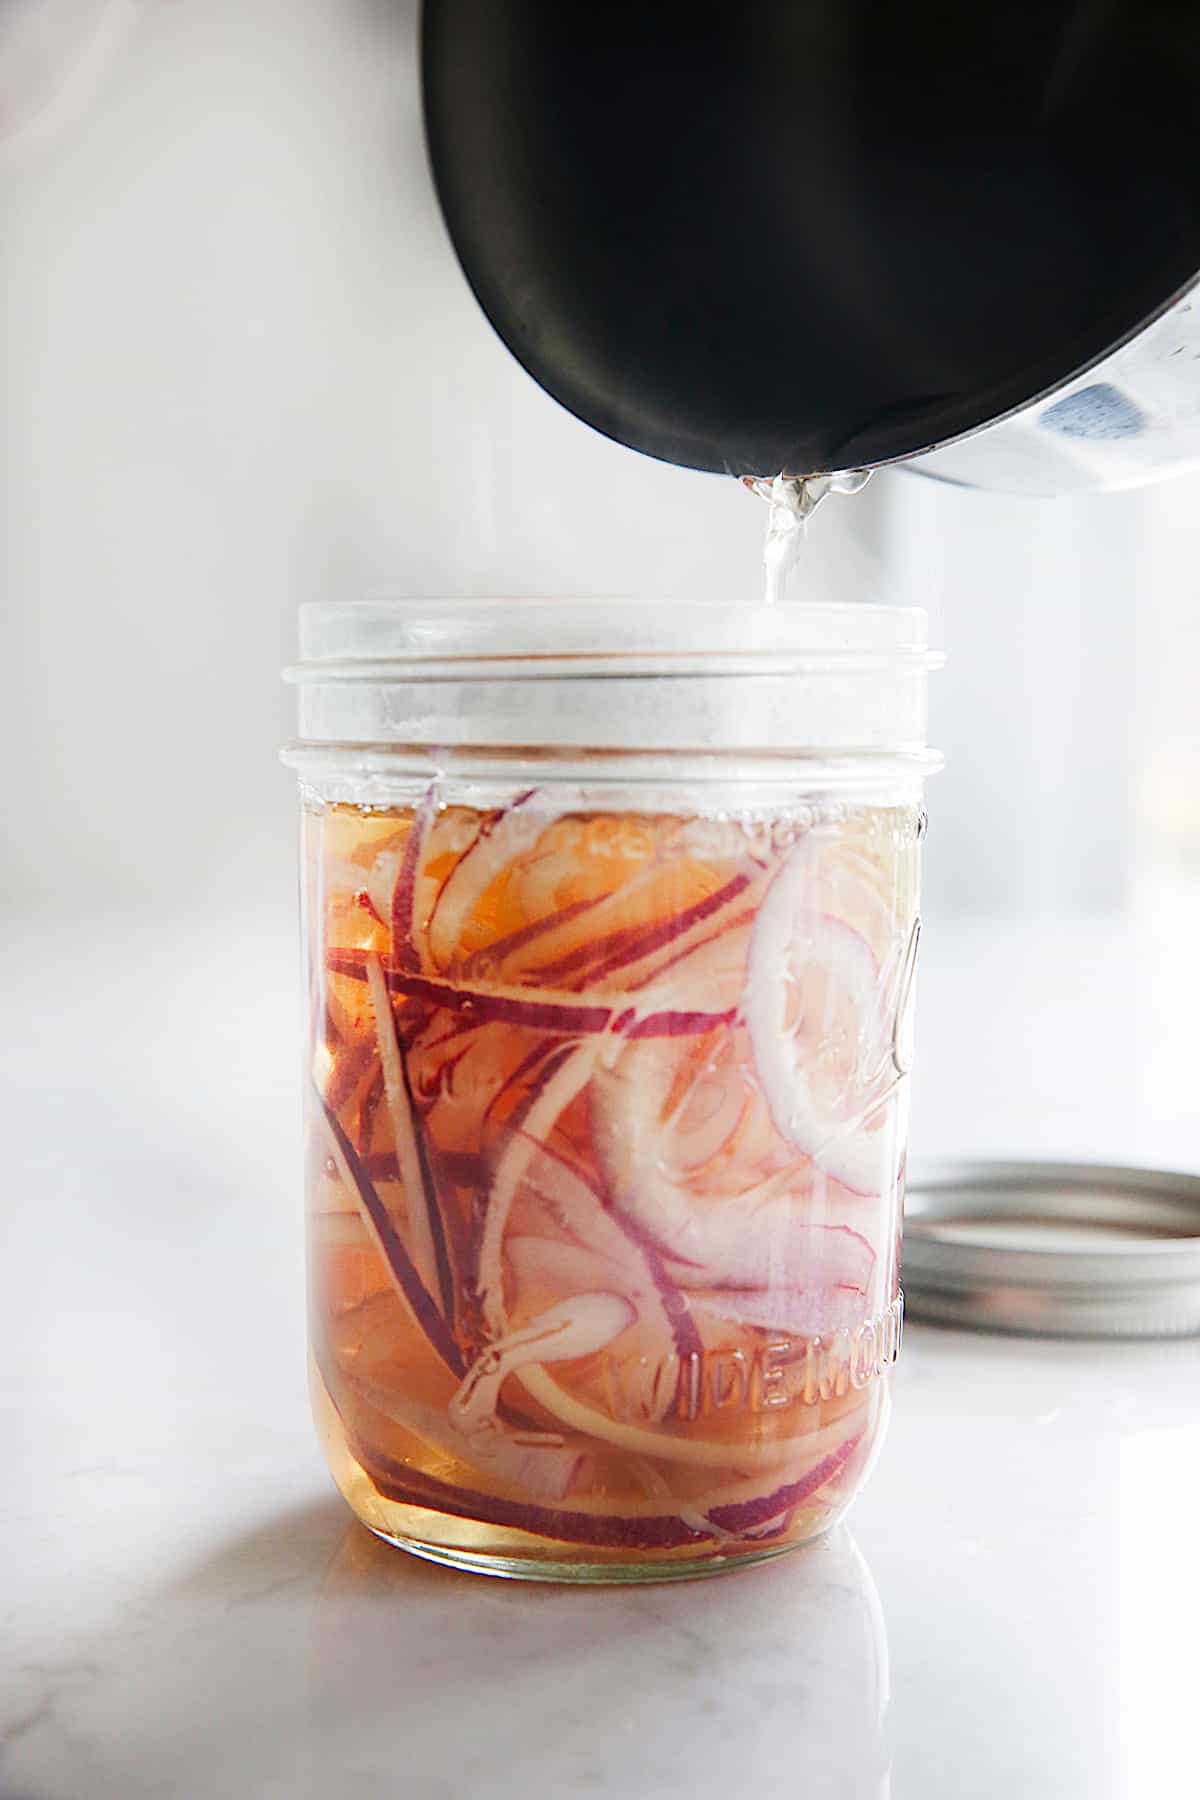 vinegar being poured into a mason jar with red onions.